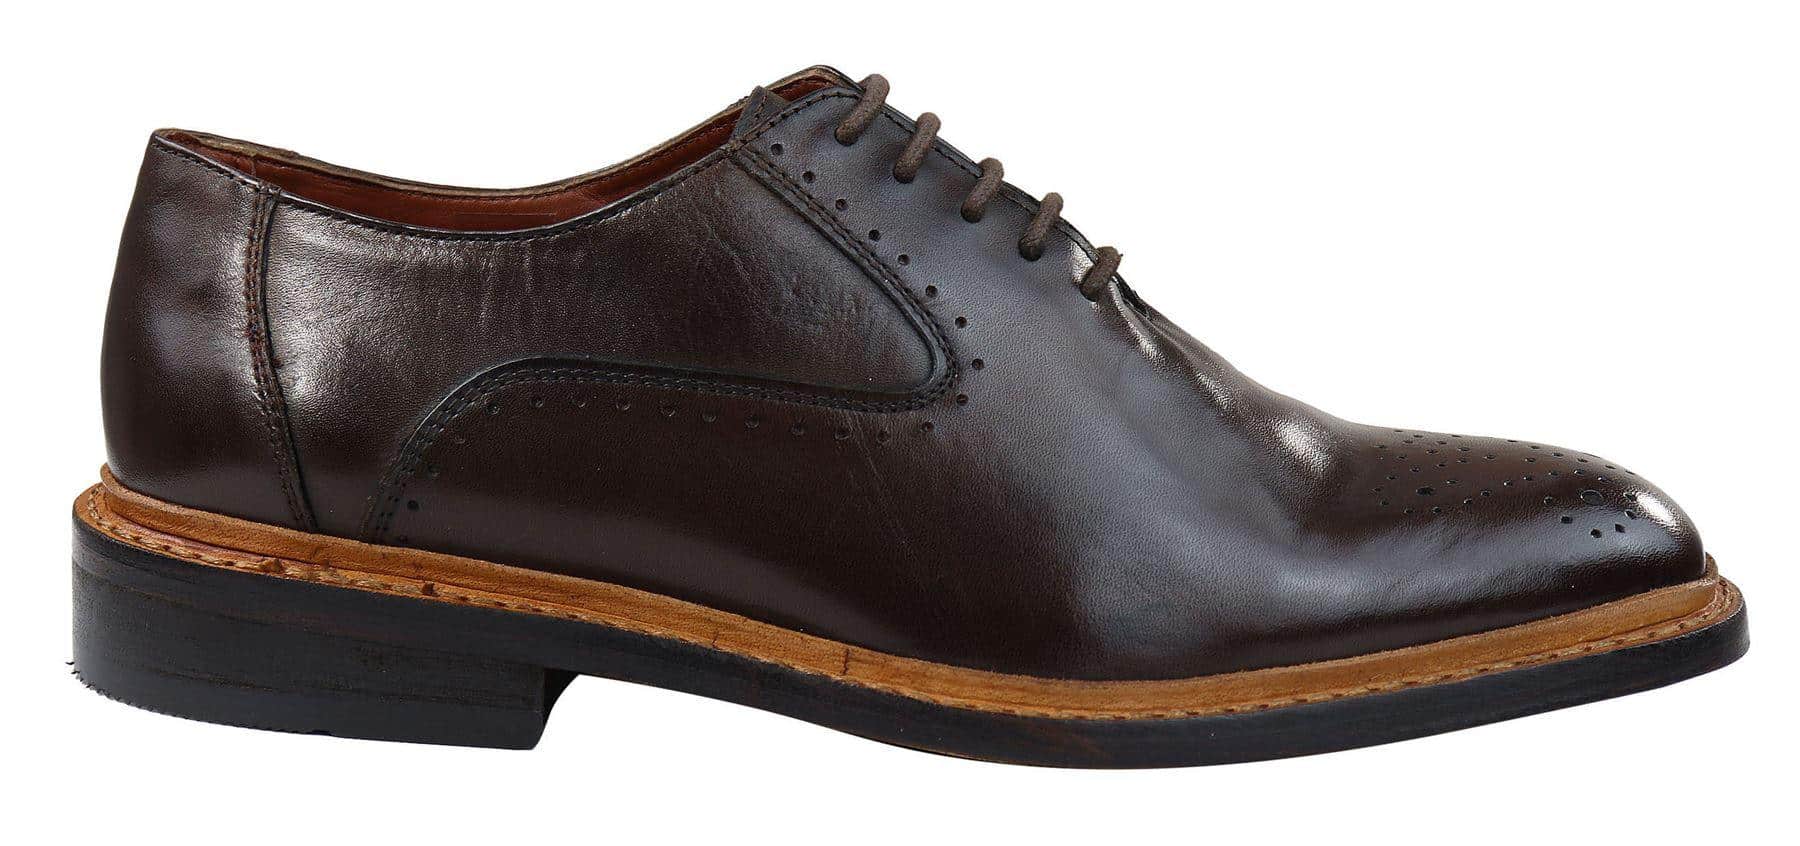 Goodyear Welted Men's Brogue Oxford Shoes